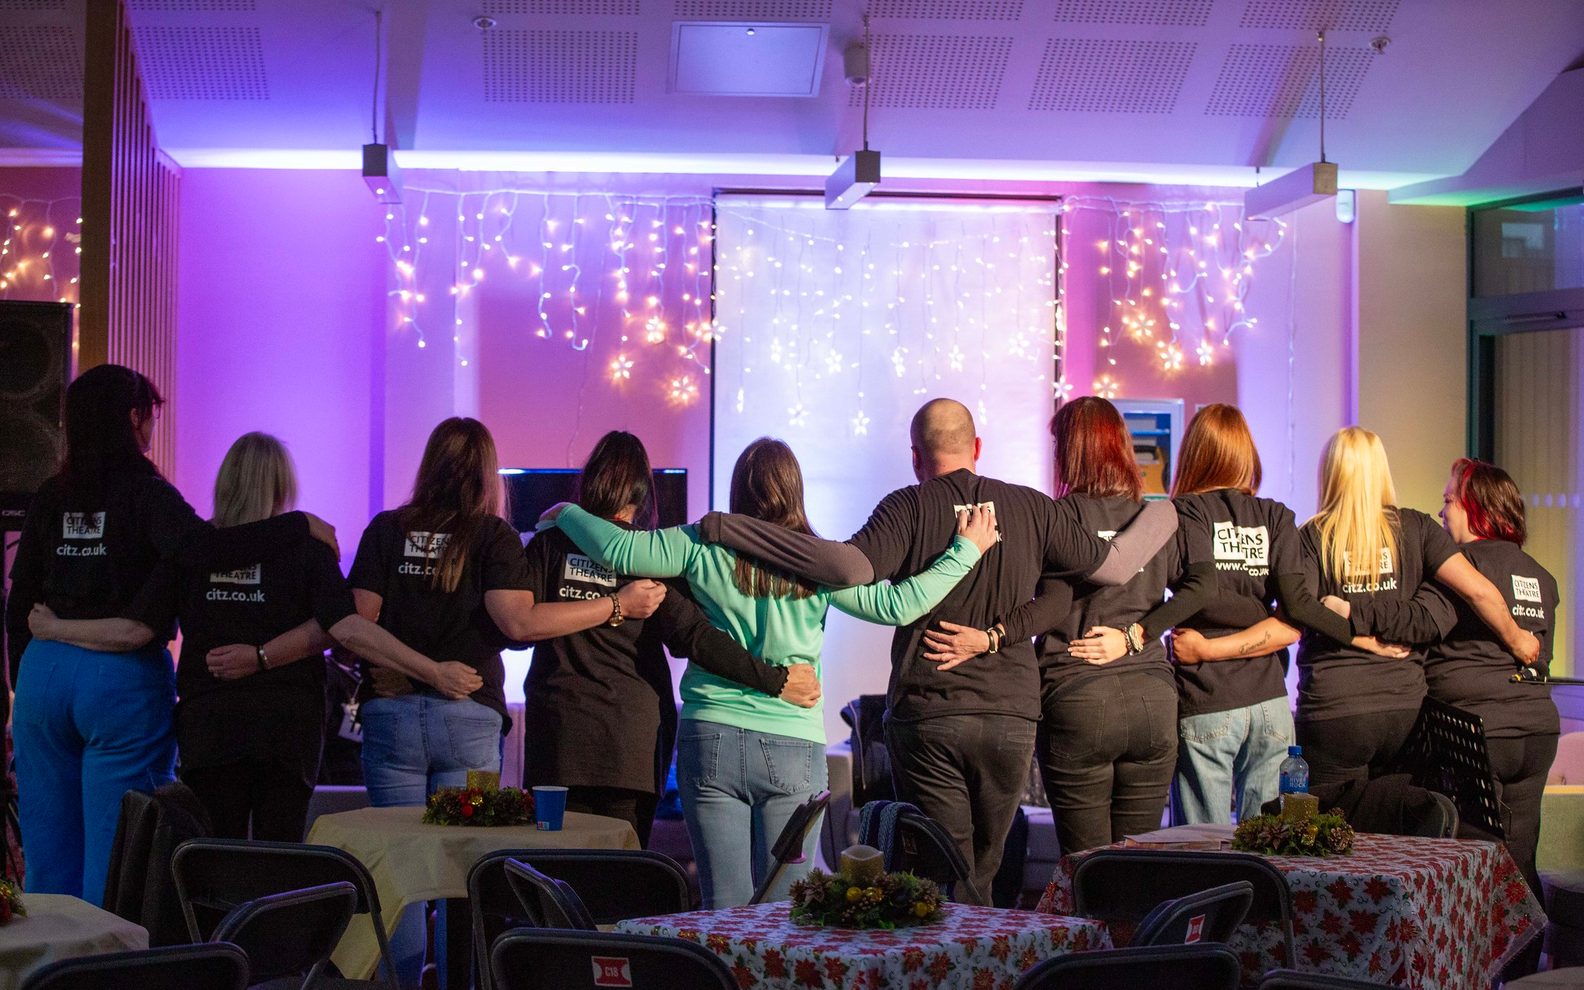 A group of people standing in a line, seen from the back. They are all holding each other and wearing Citizens Theatre t-shirts. The room is illuminated in purple lighting with fairy lights.